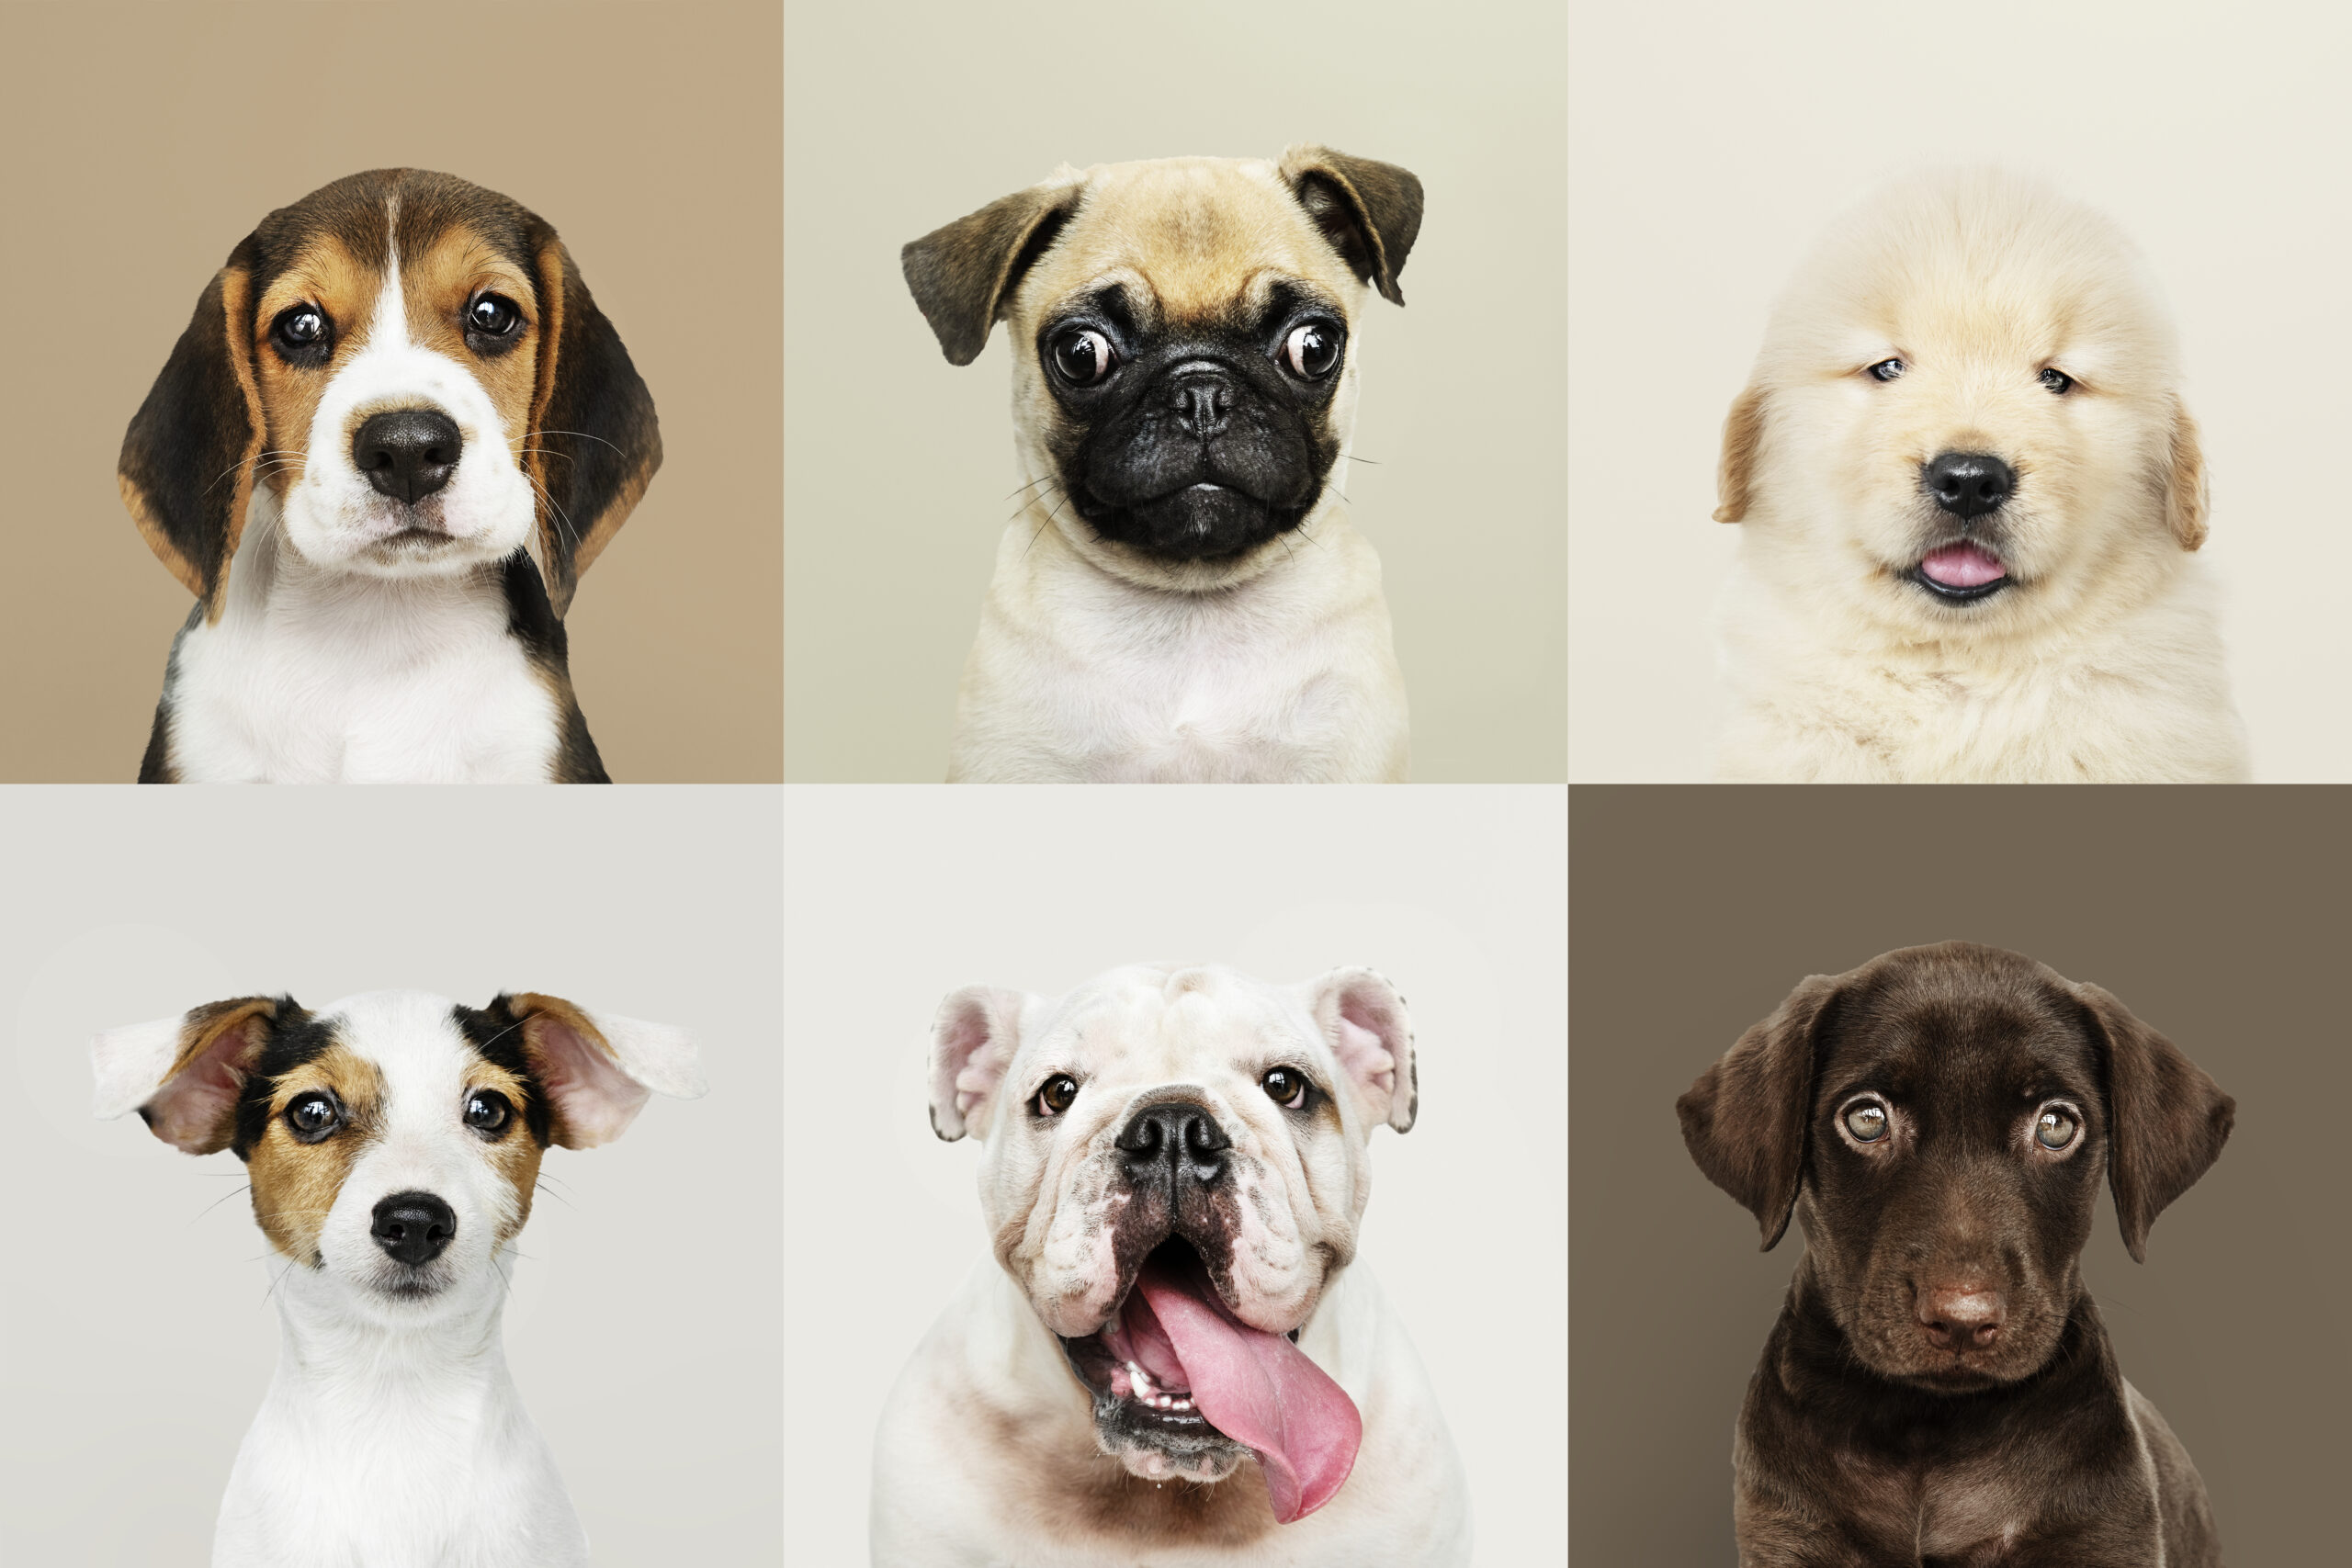 Adorable puppy and dog portraits with different breeds, mix and pure breed